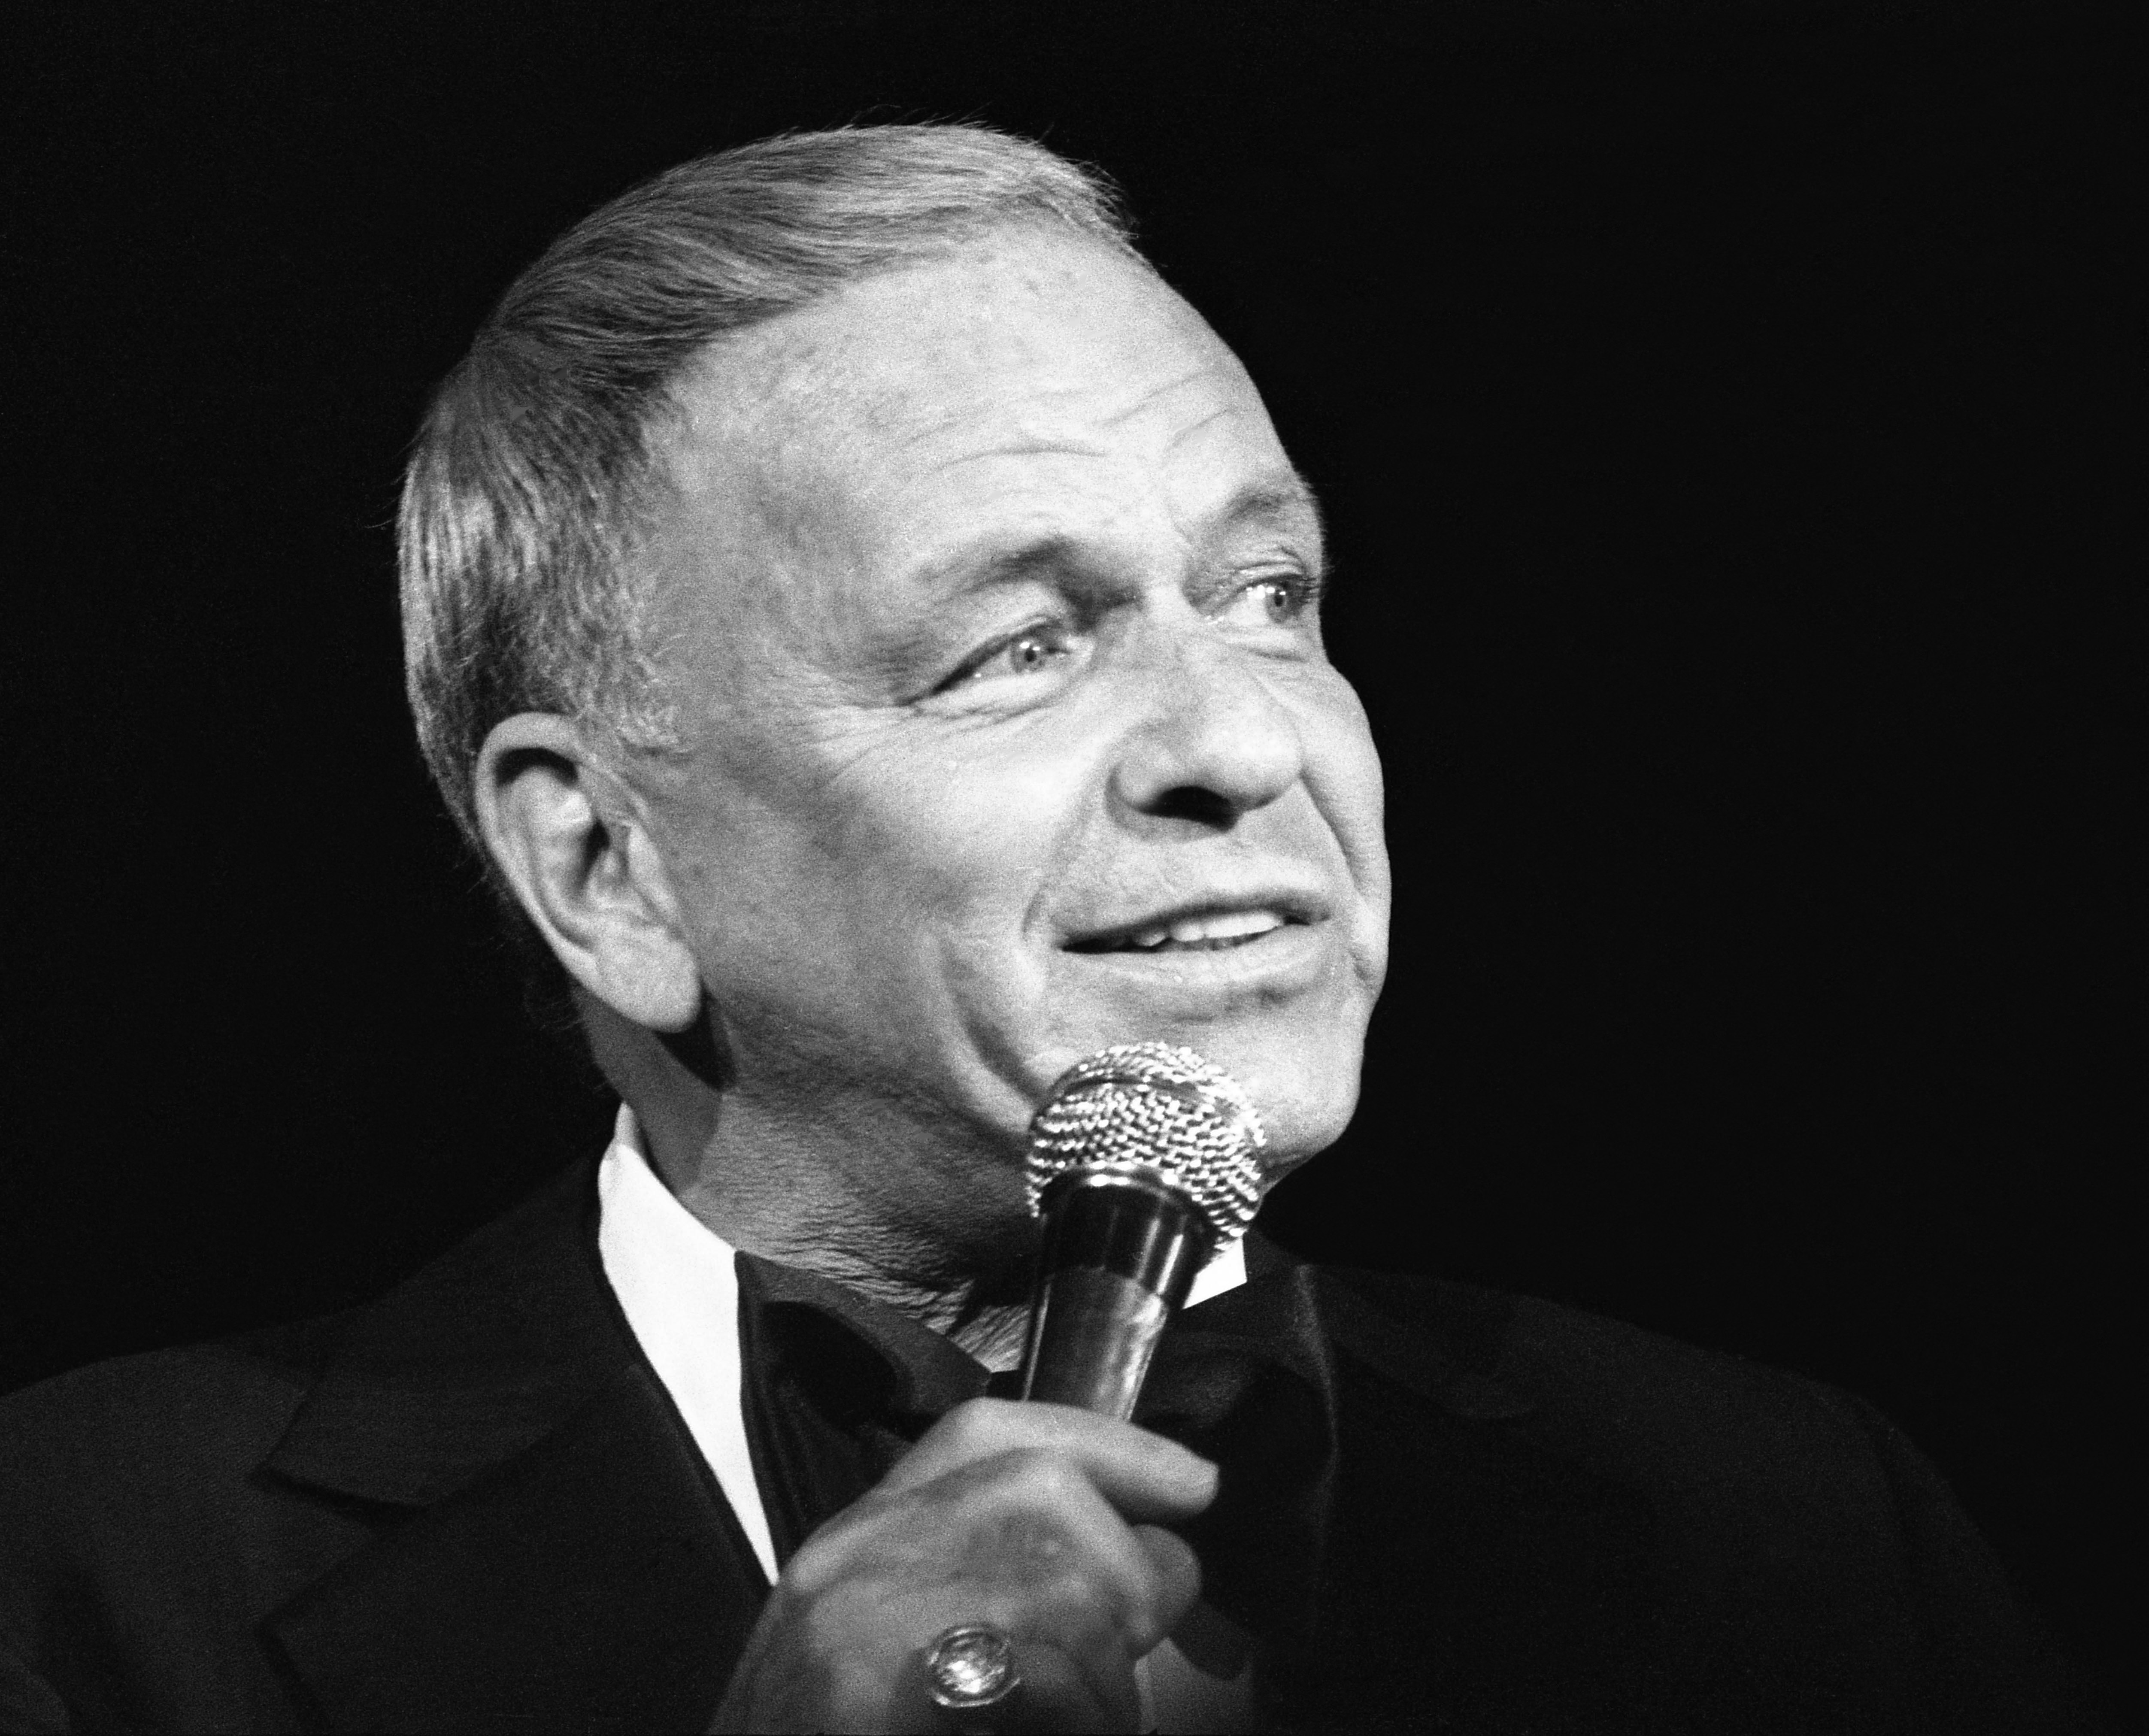 Frank Sinatra sings at The Universal Amphitheatre in Universal City, California on July 6, 1980 | Source: Getty Images